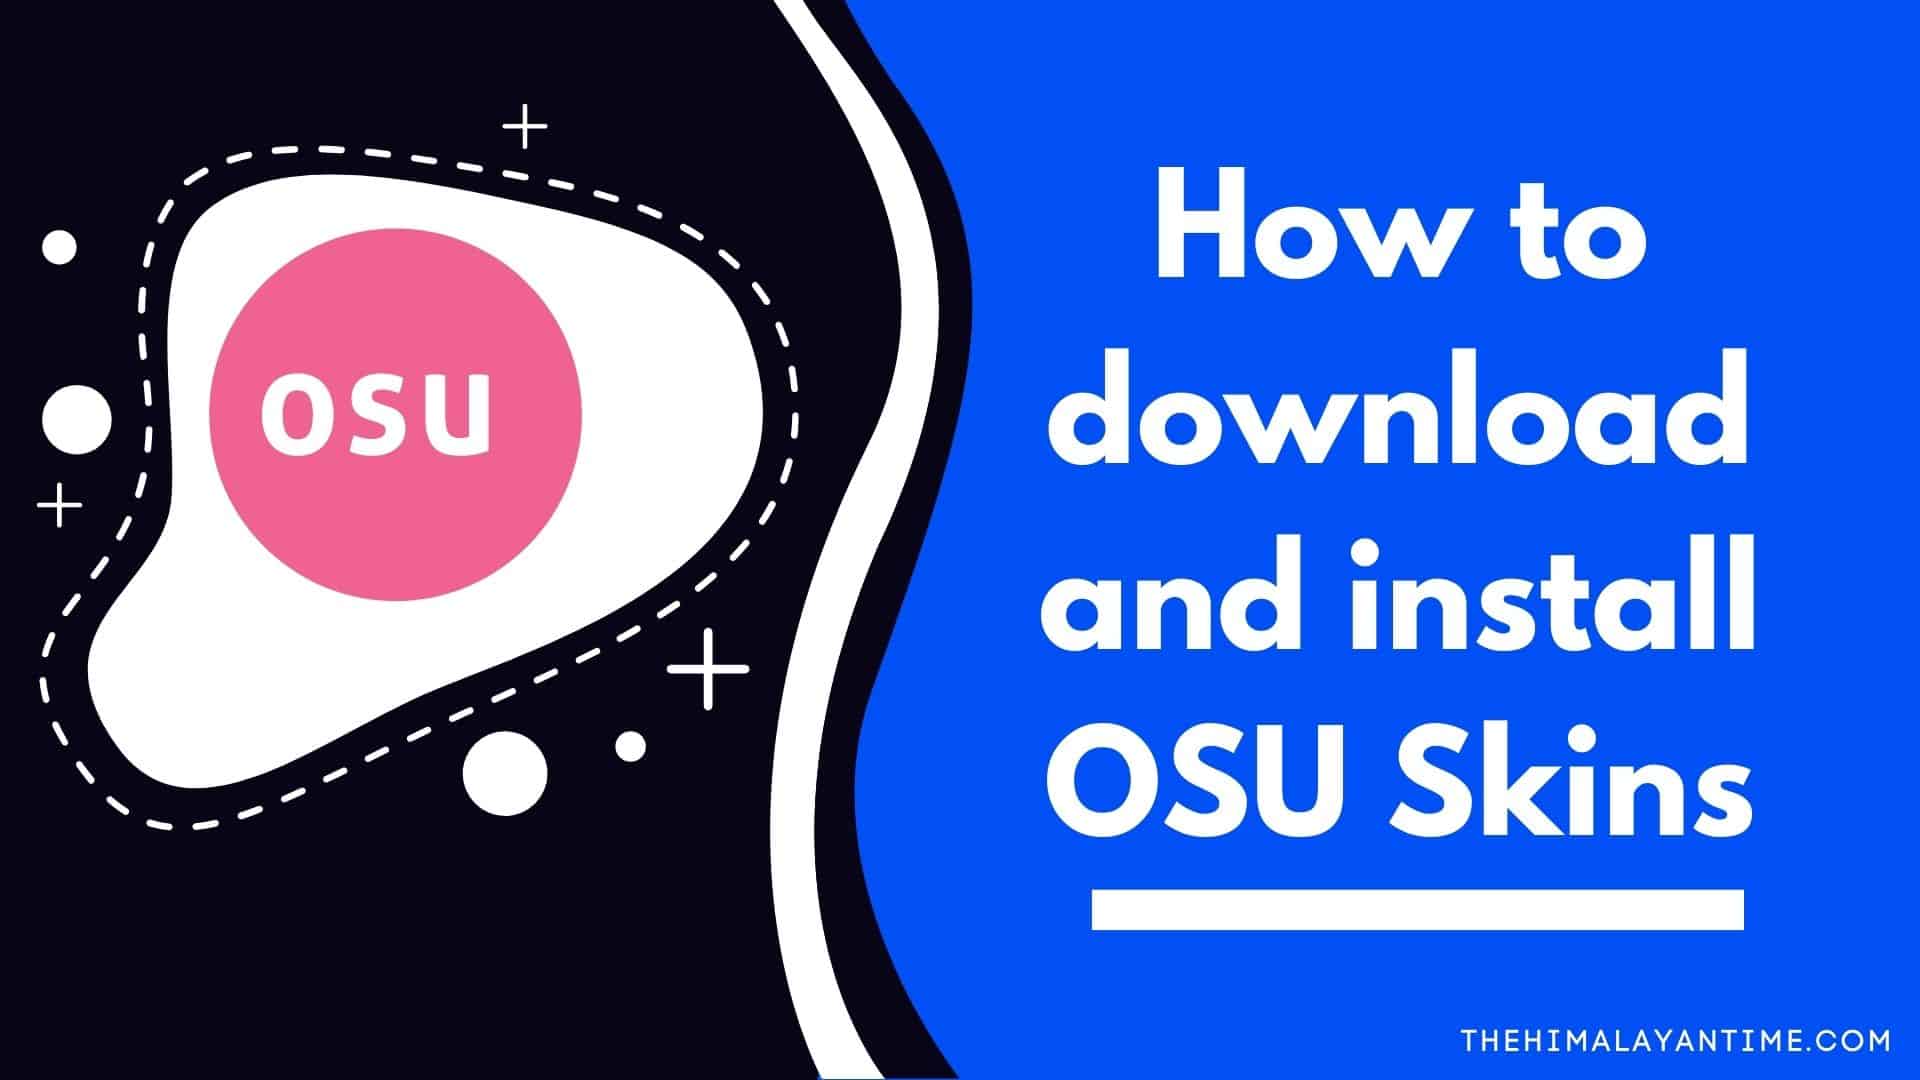 How to download and install OSU Skins